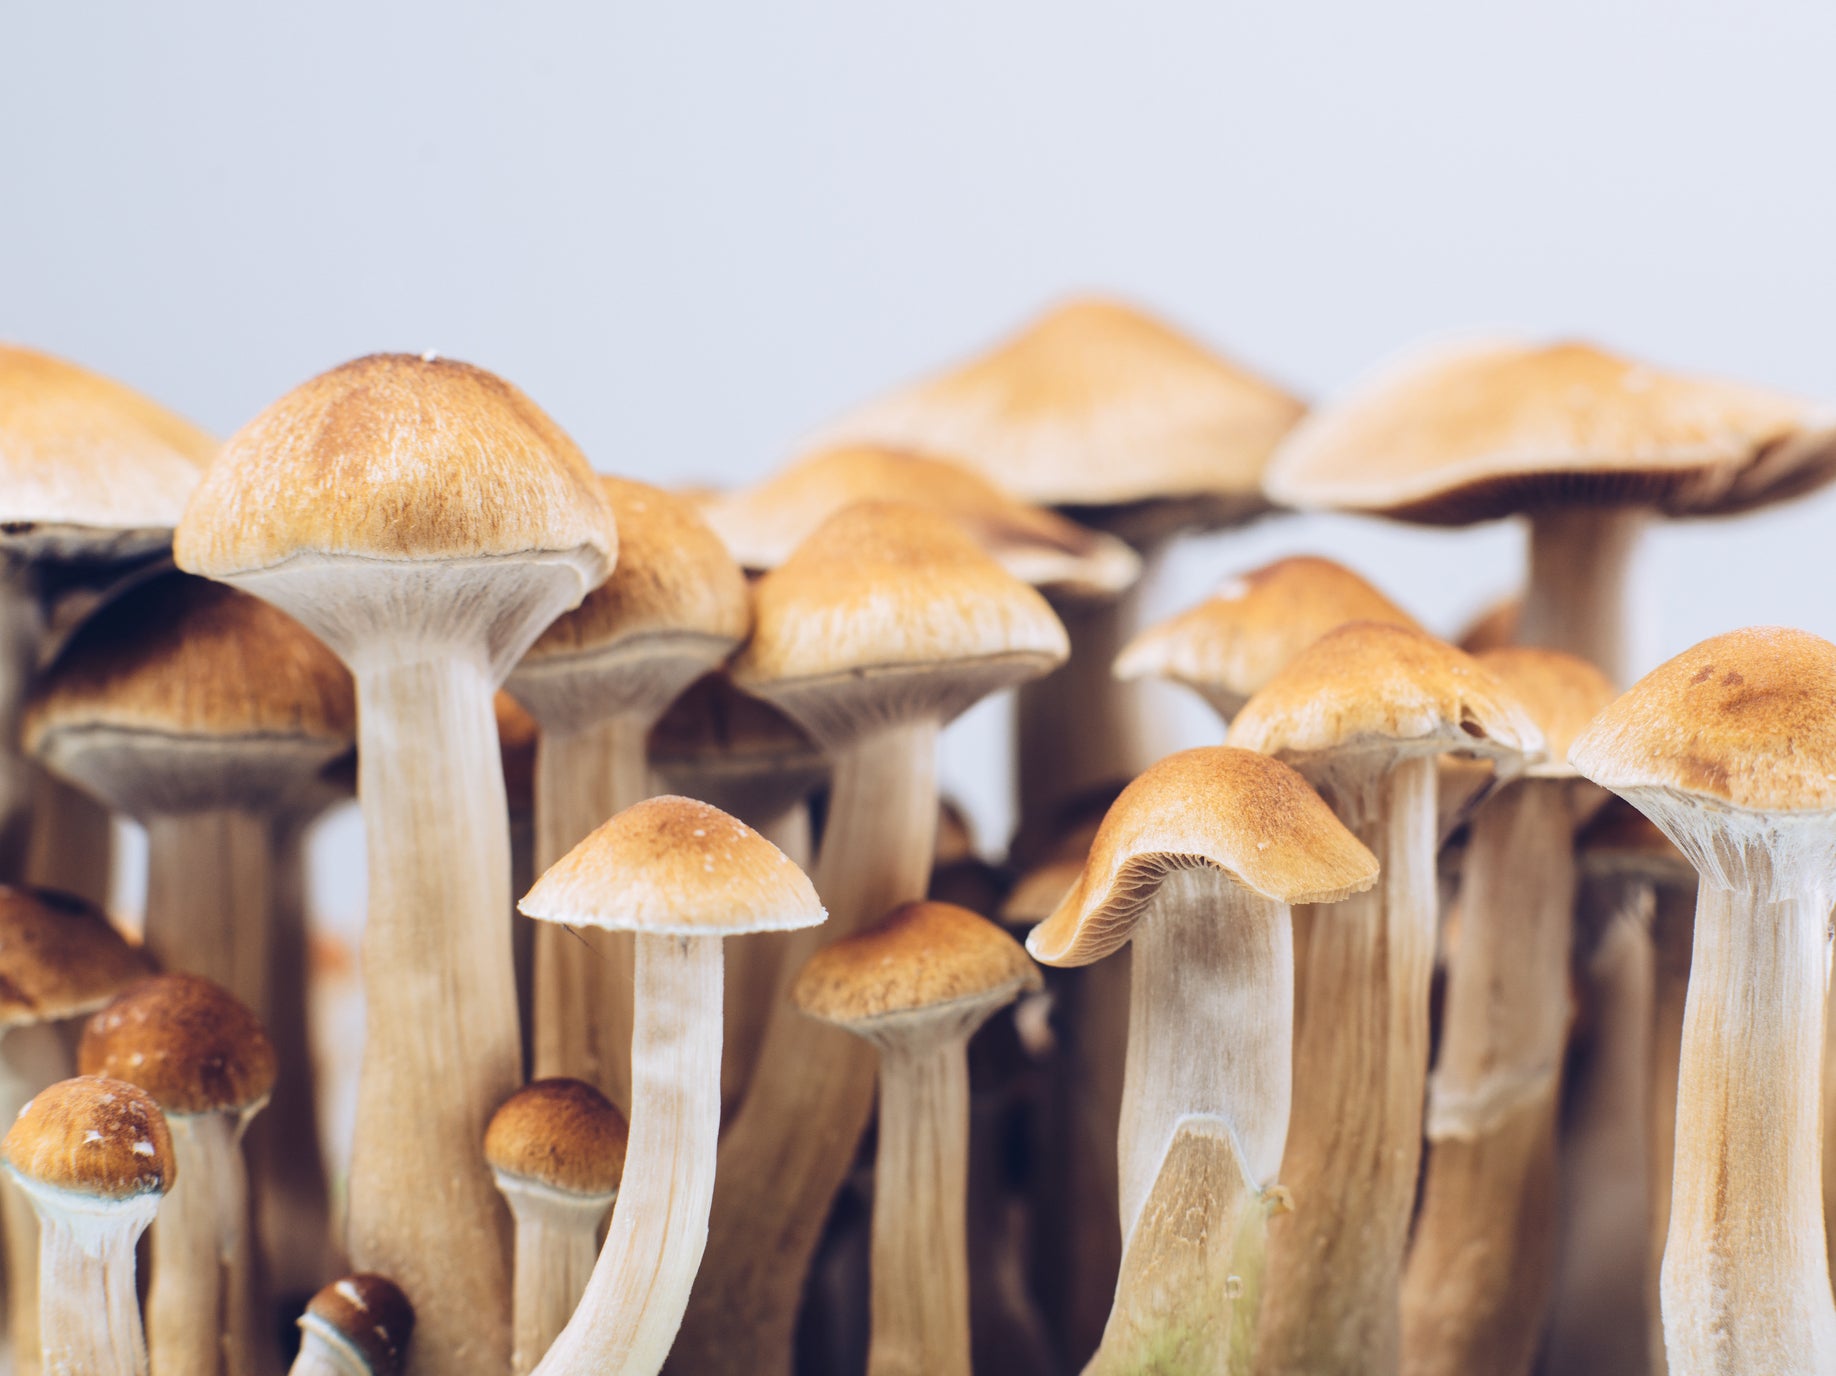 Small doses of the drug psilocybin could treat PTSD